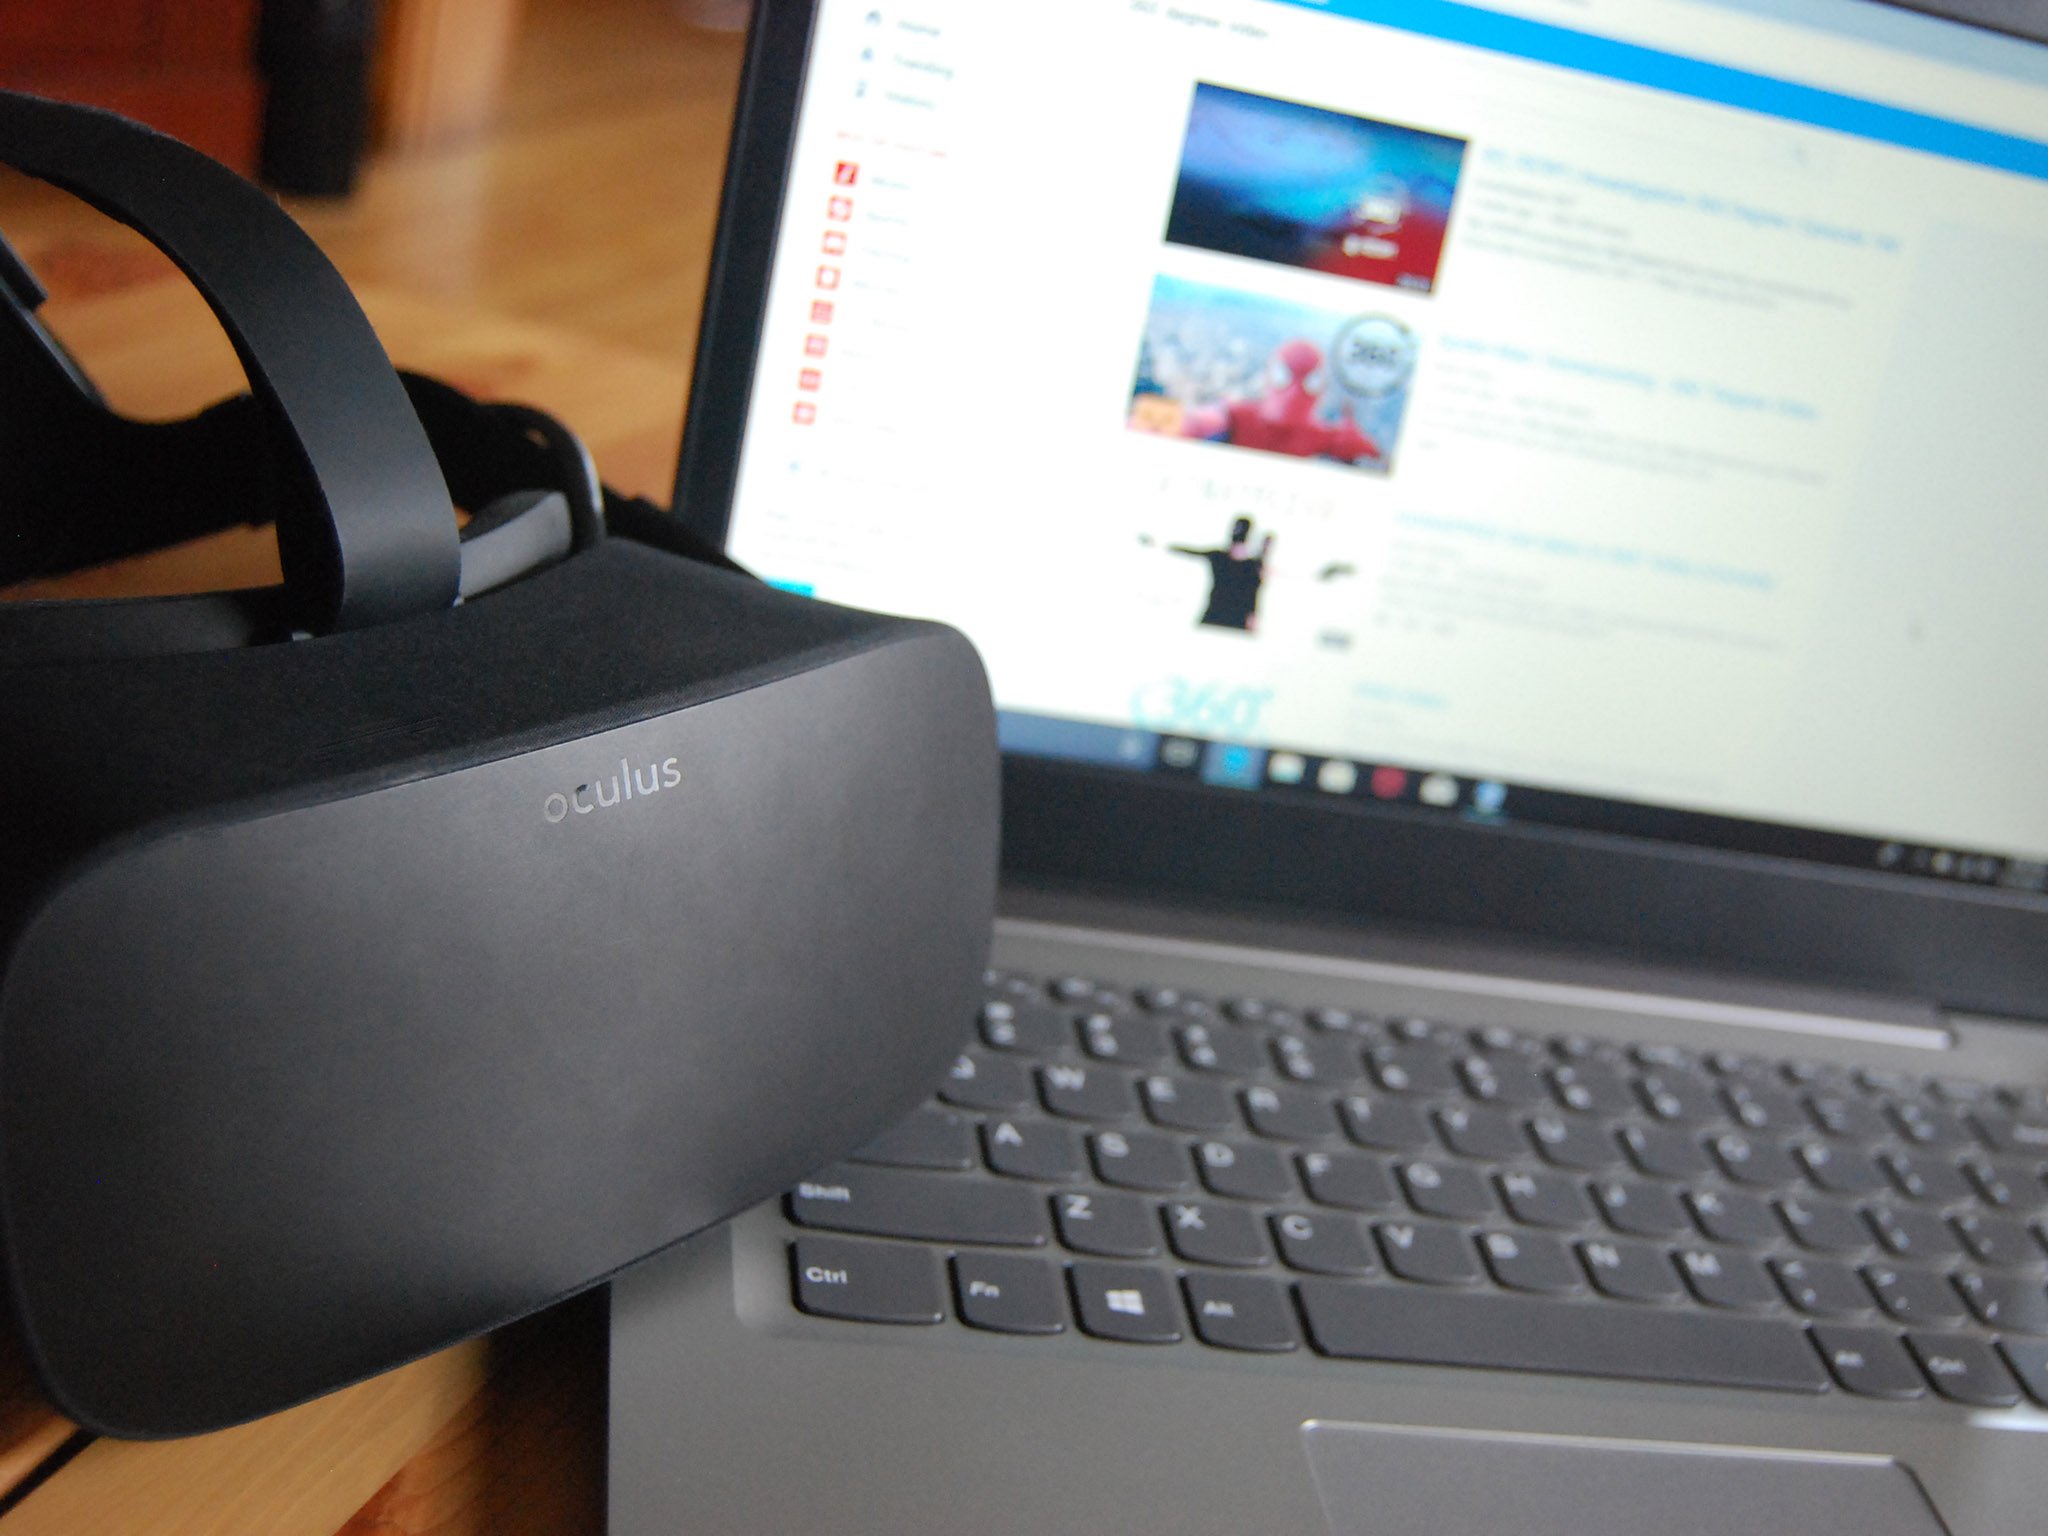 How to 360-degree YouTube videos Oculus Rift | Windows Central